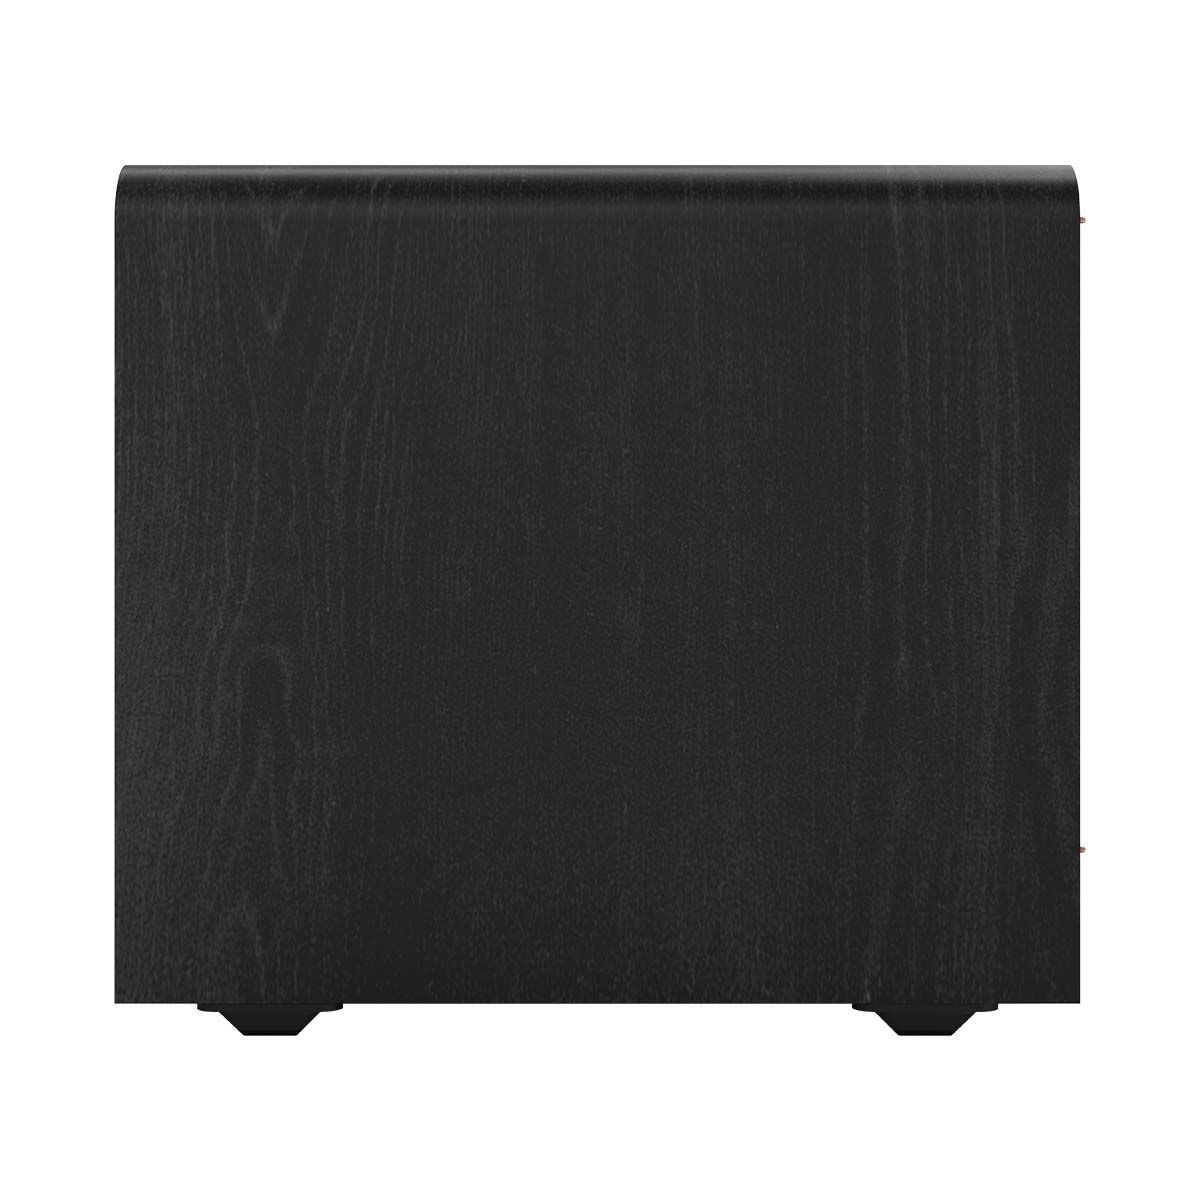 Klipsch RP-1400SW 14" Powered Subwoofer - Ebony - side view without grille